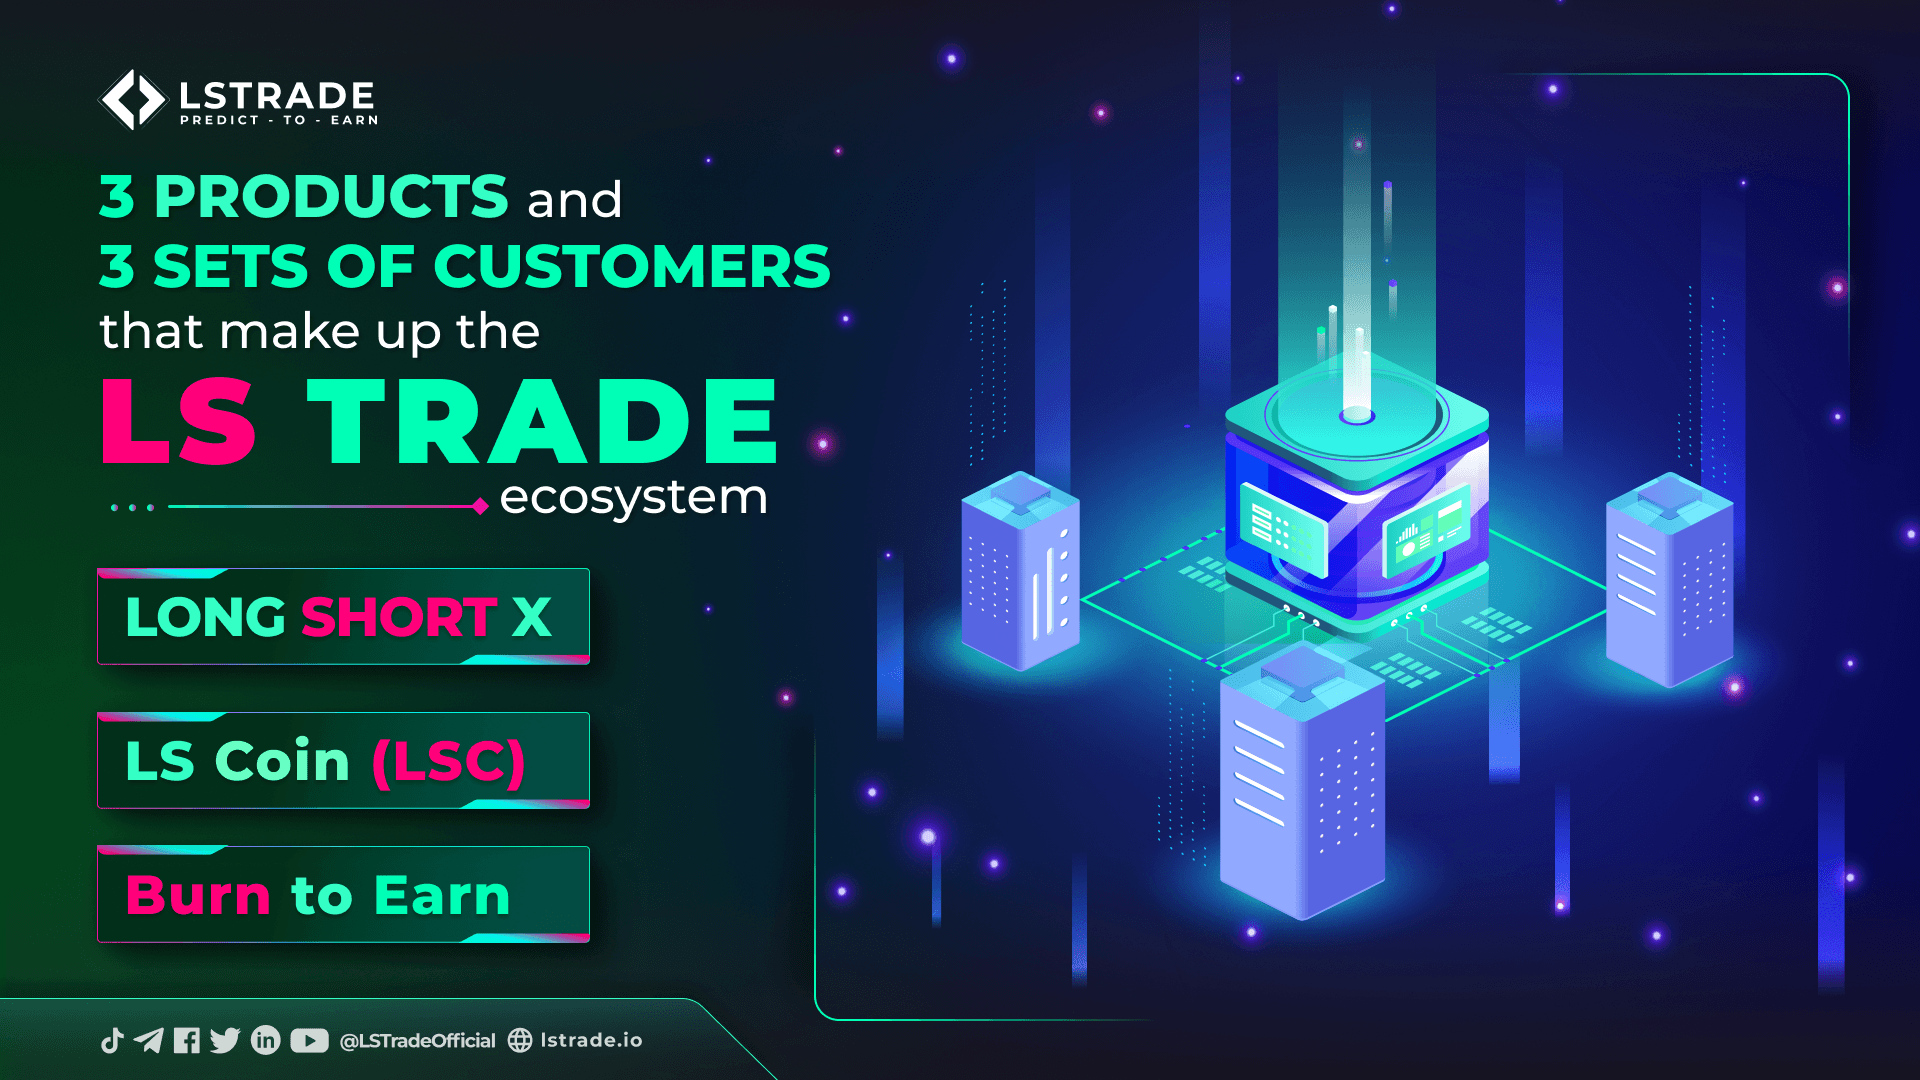 3 PRODUCTS AND 3 SETS OF CUSTOMERS THAT MAKE UP THE LS TRADE ECOSYSTEM